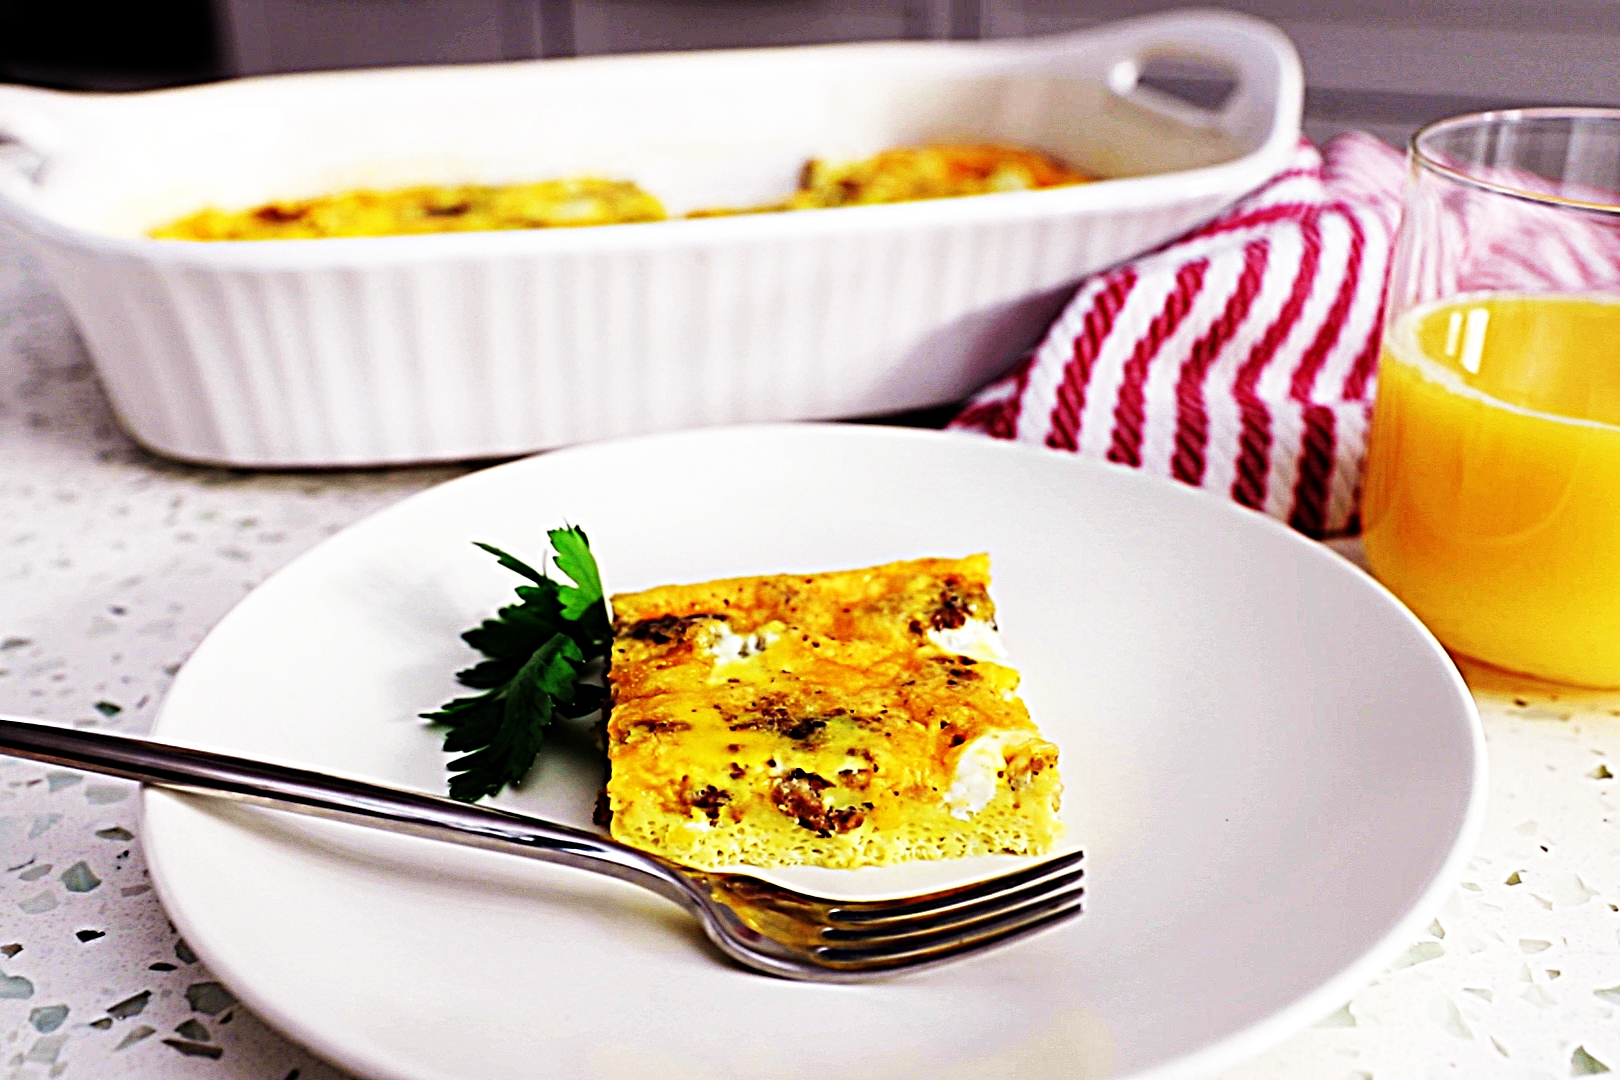 Stupid-Easy Recipe for Sausage and Cheese Egg Casserole (#1 Top-Rated)